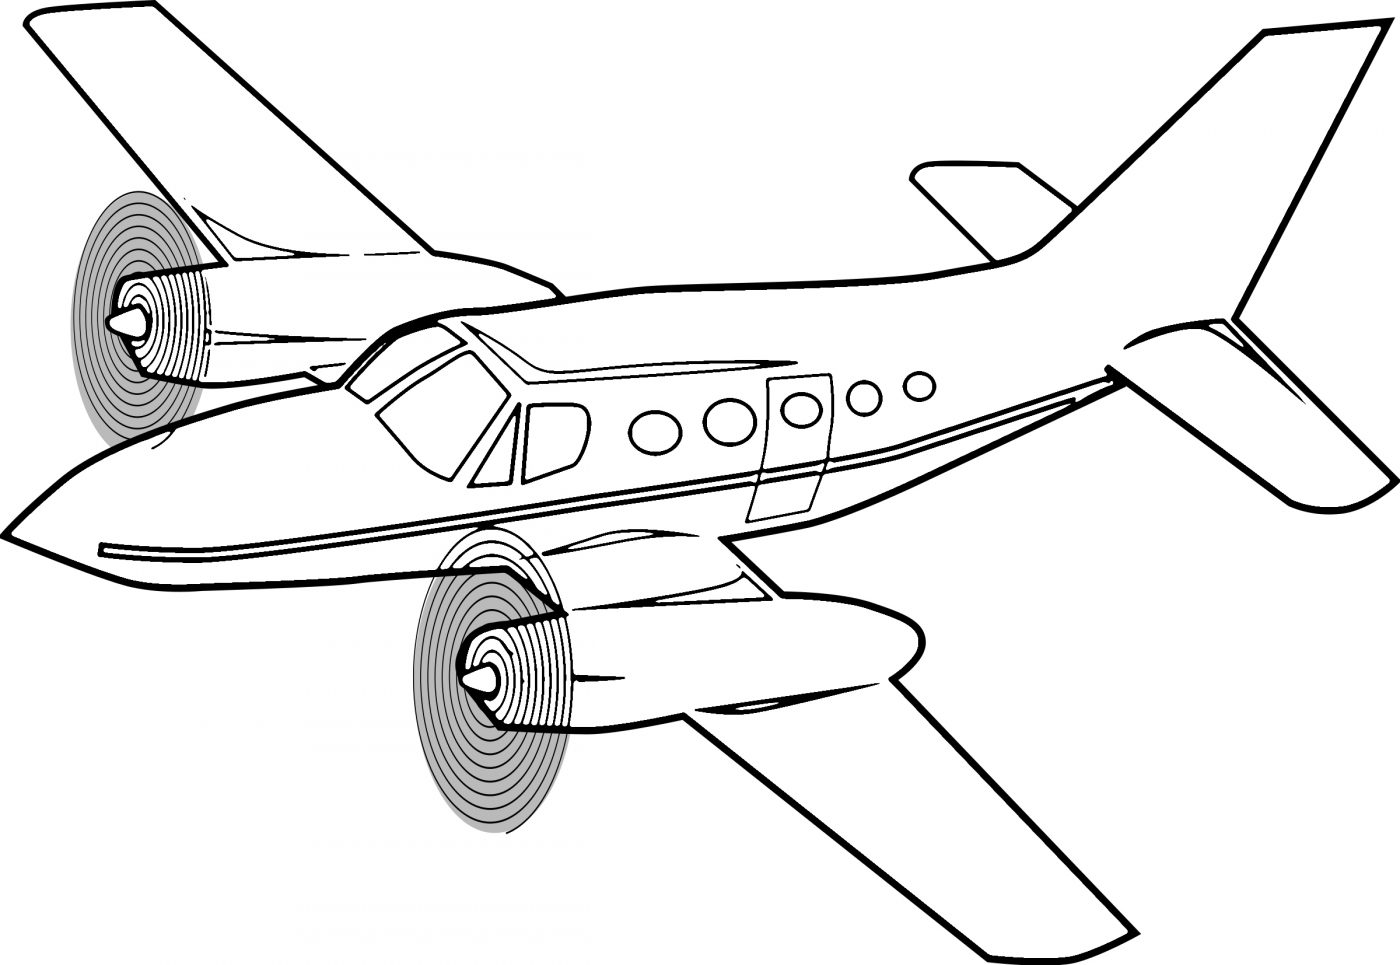 coloring-picture-of-an-airplane-free-printable-airplane-coloring-pages